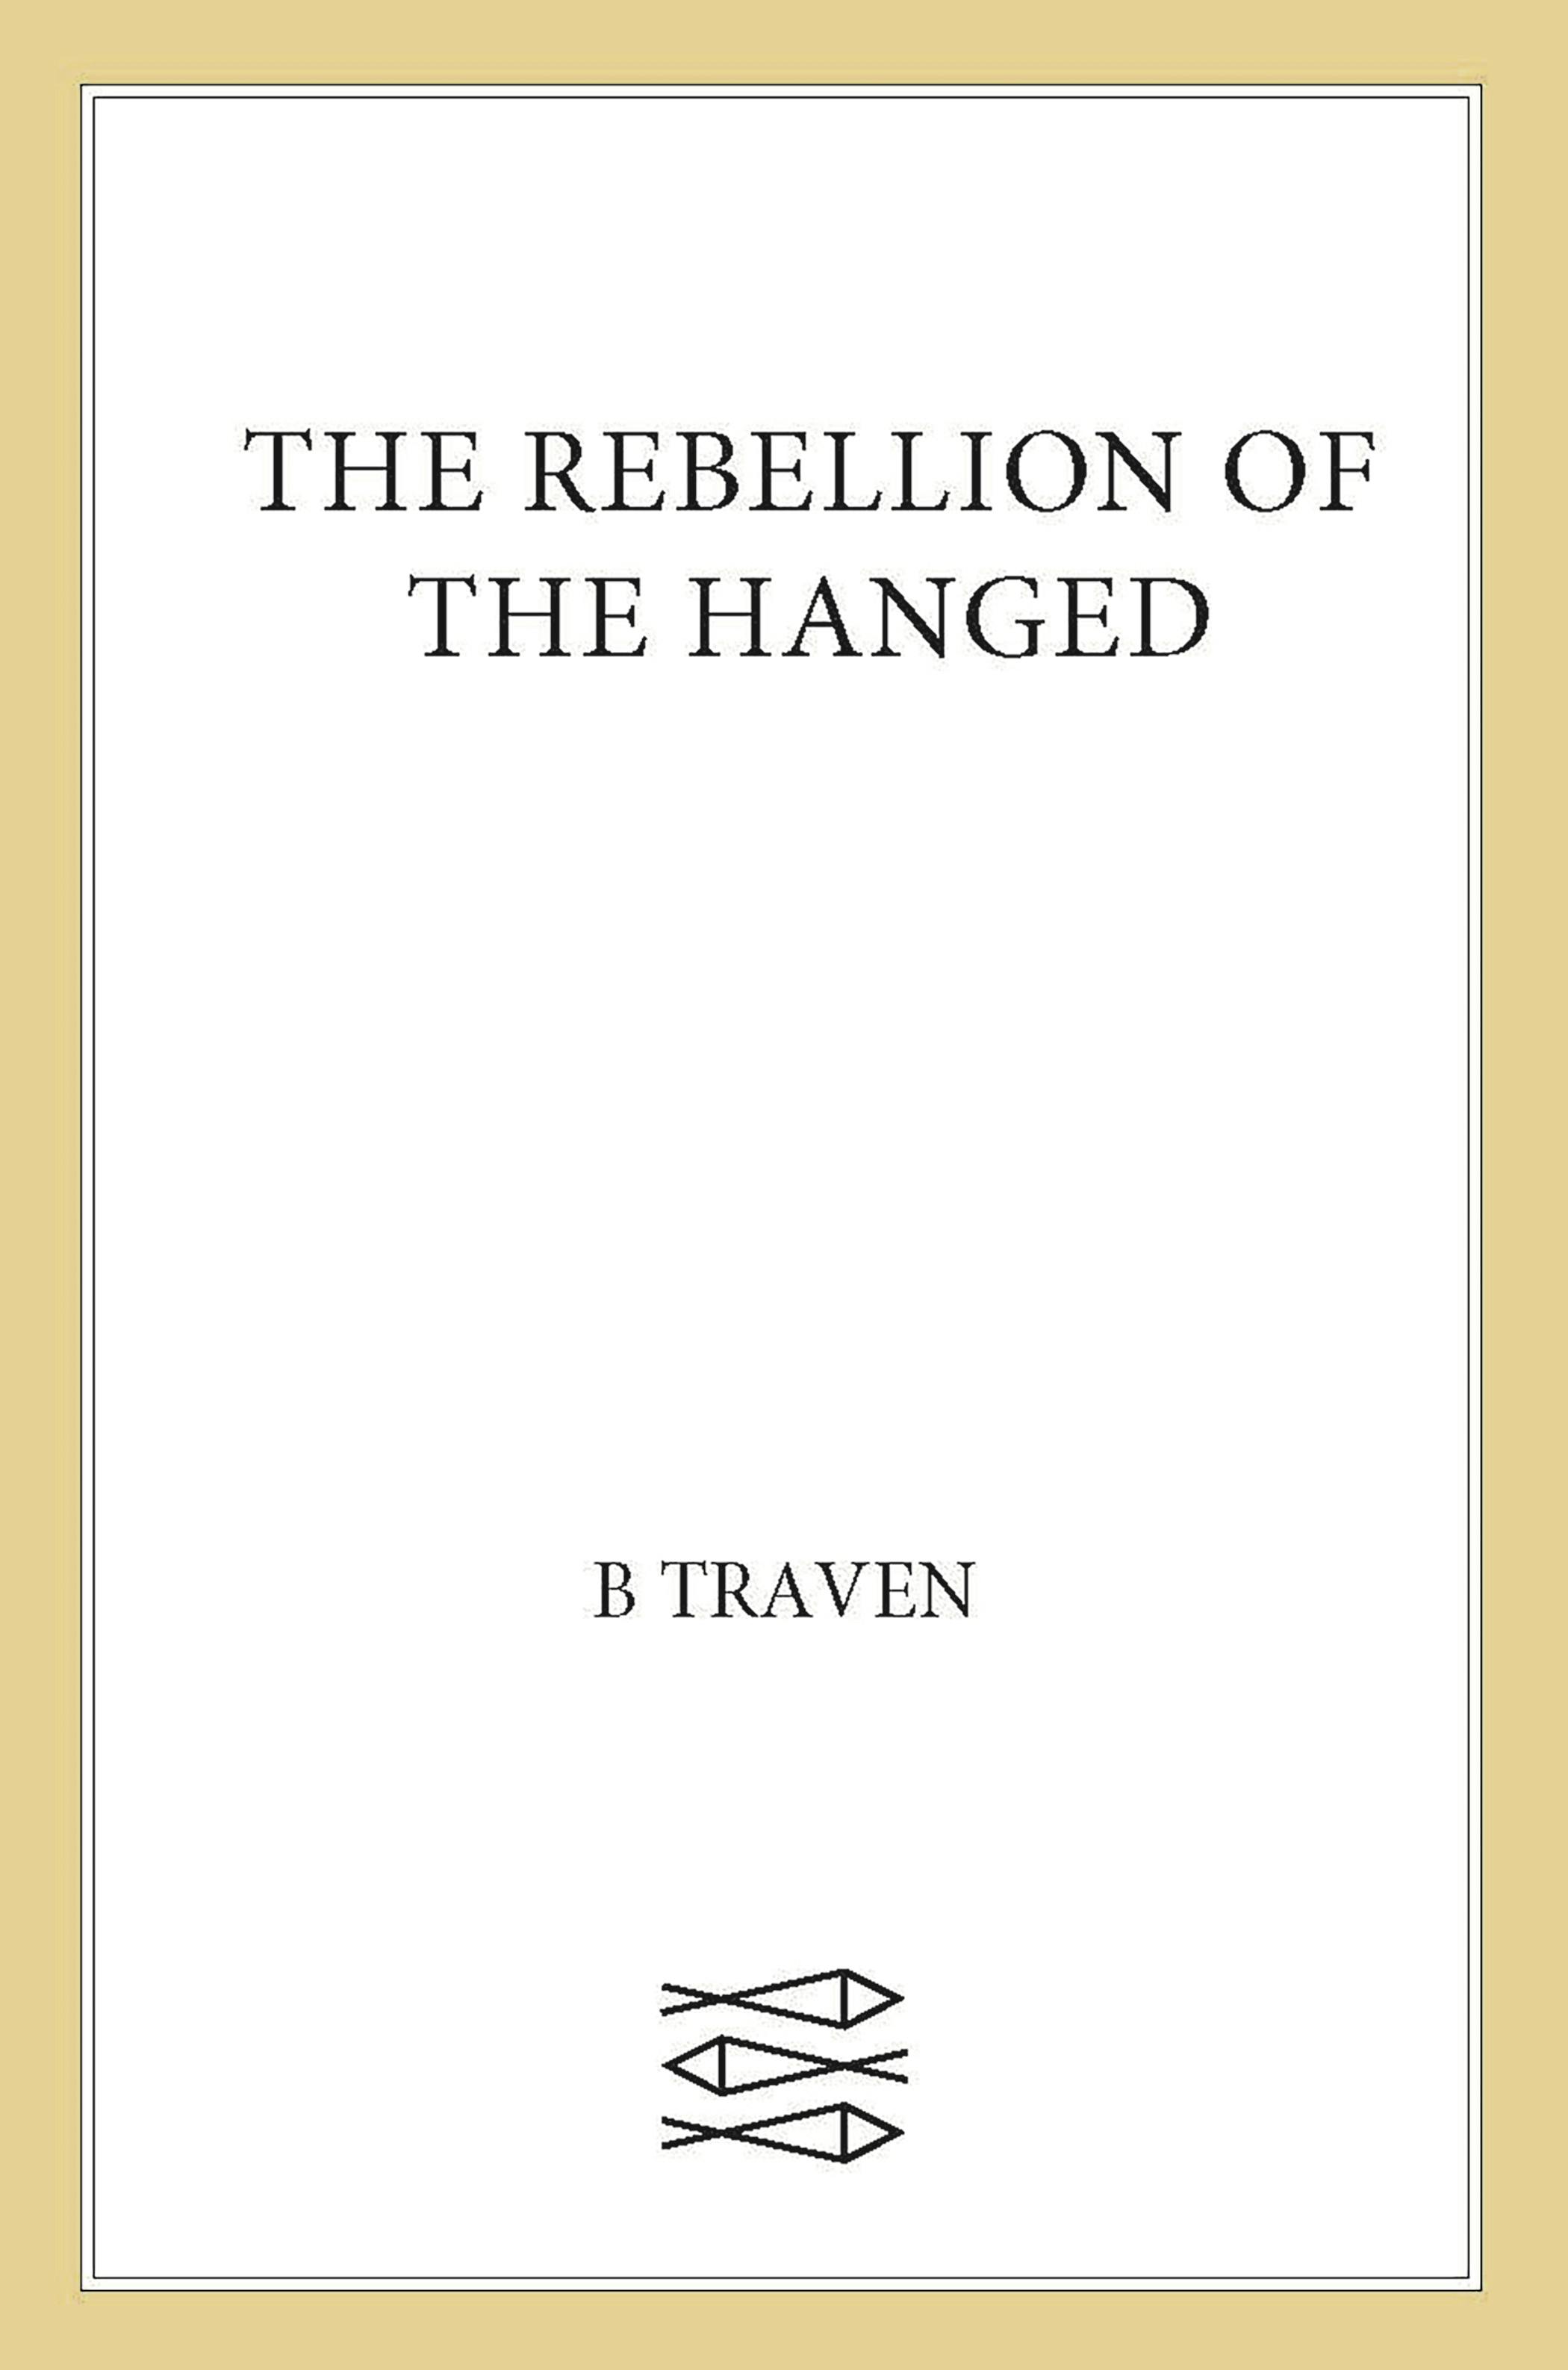 Image of The Rebellion of the Hanged